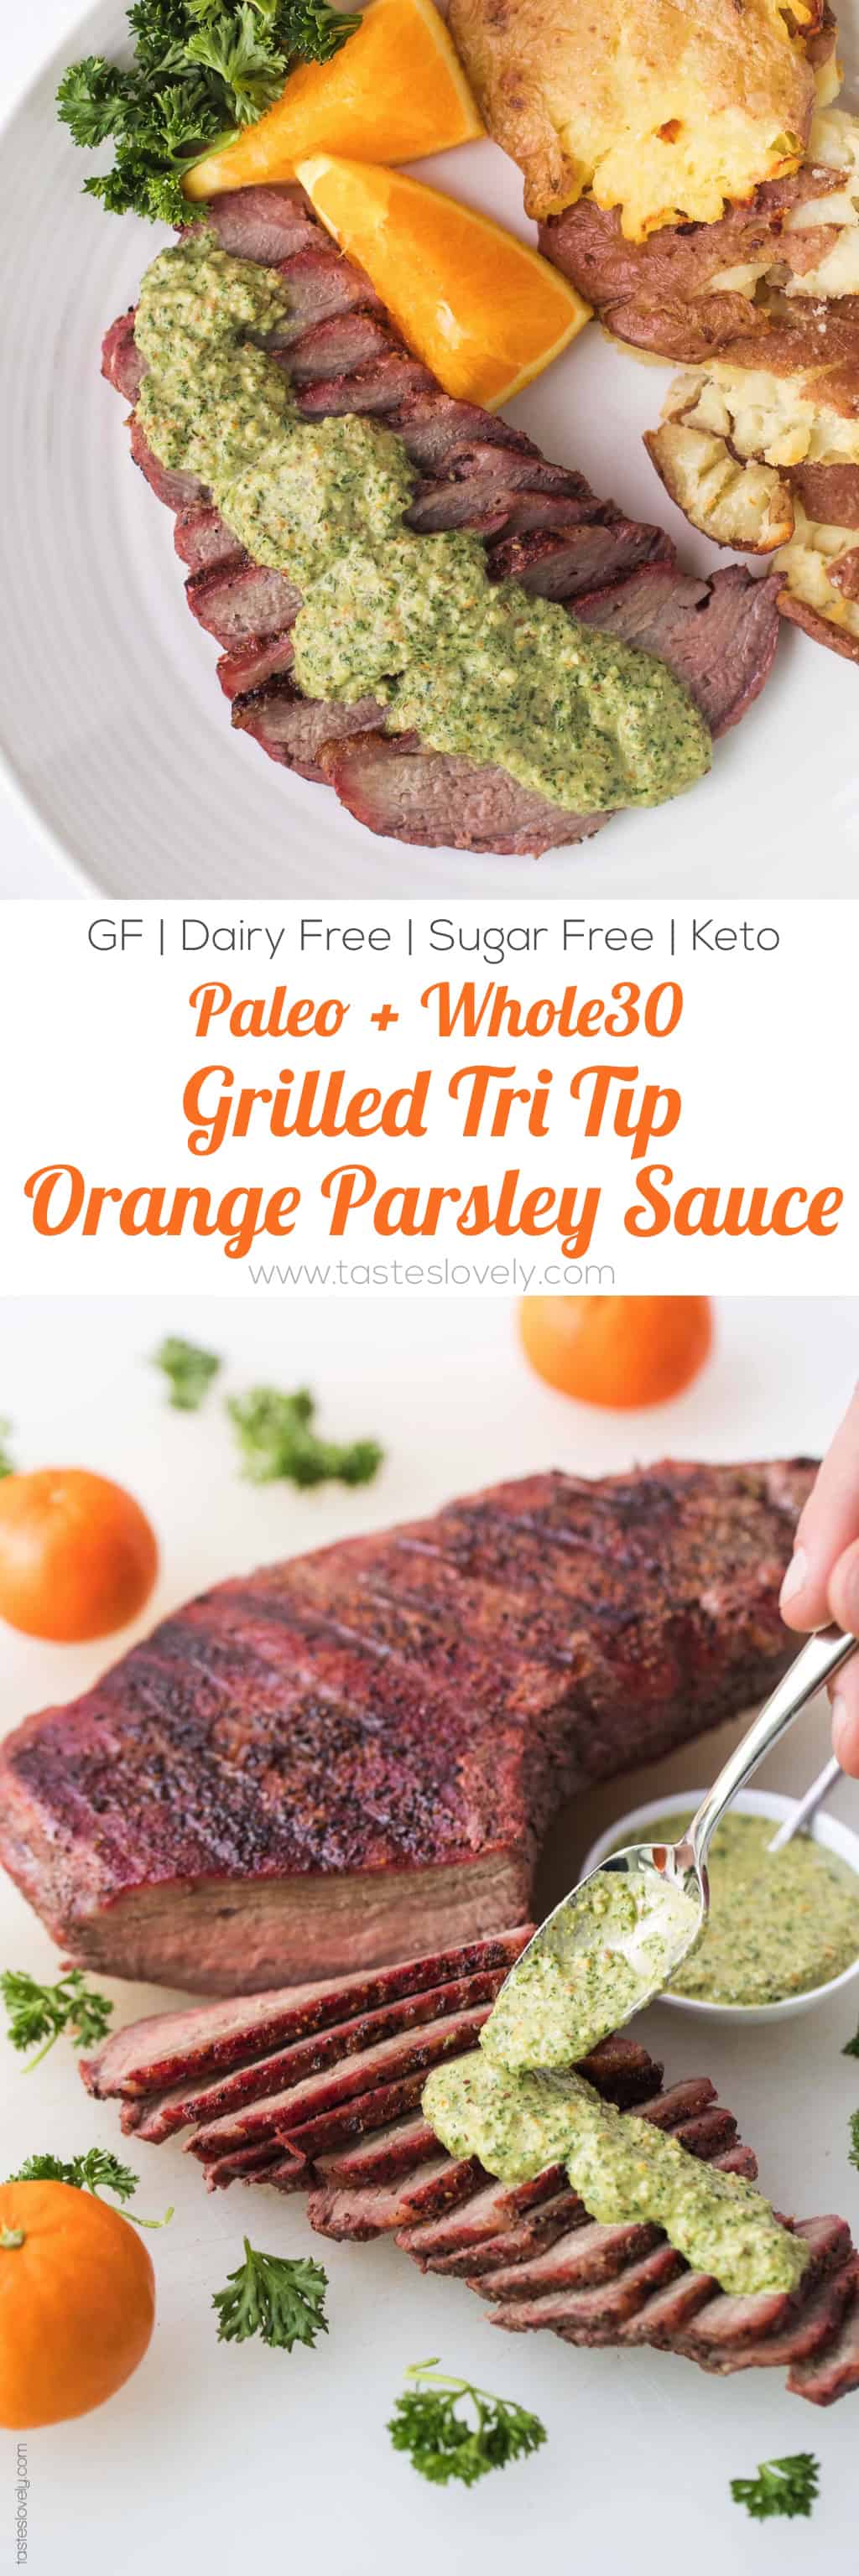 Paleo + Whole30 Tri Tip with Orange Parsley Sauce Recipe - a 30 minute summer grilling recipe. Gluten free, grain free, dairy free, sugar free, keto, clean eating, real food.